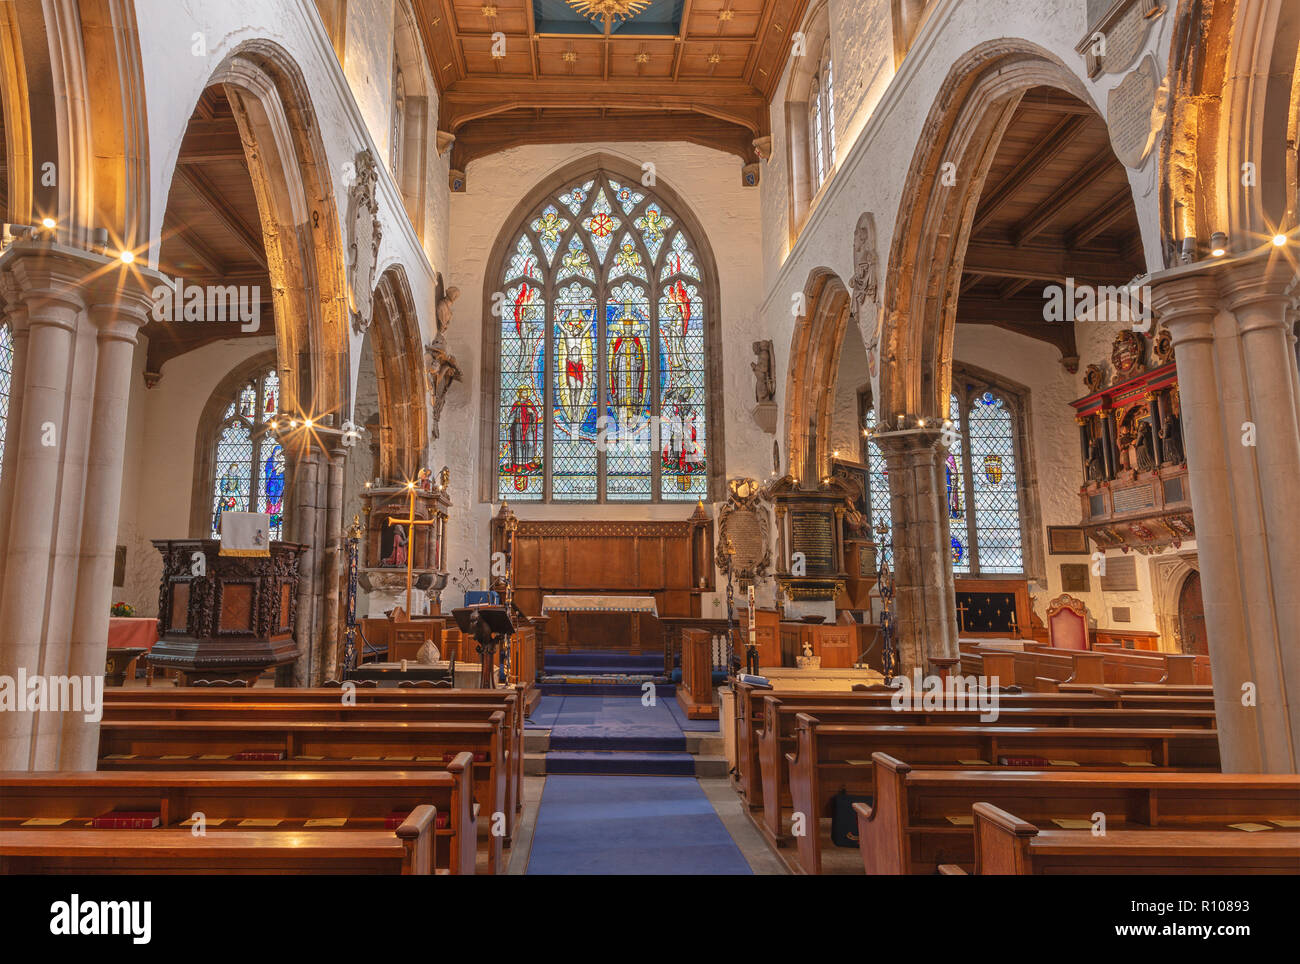 LONDON, GREAT BRITAIN - SEPTEMBER 20, 2017: The nave of church St. Olave with the stained glass by A. E. Buss (1953). Stock Photo